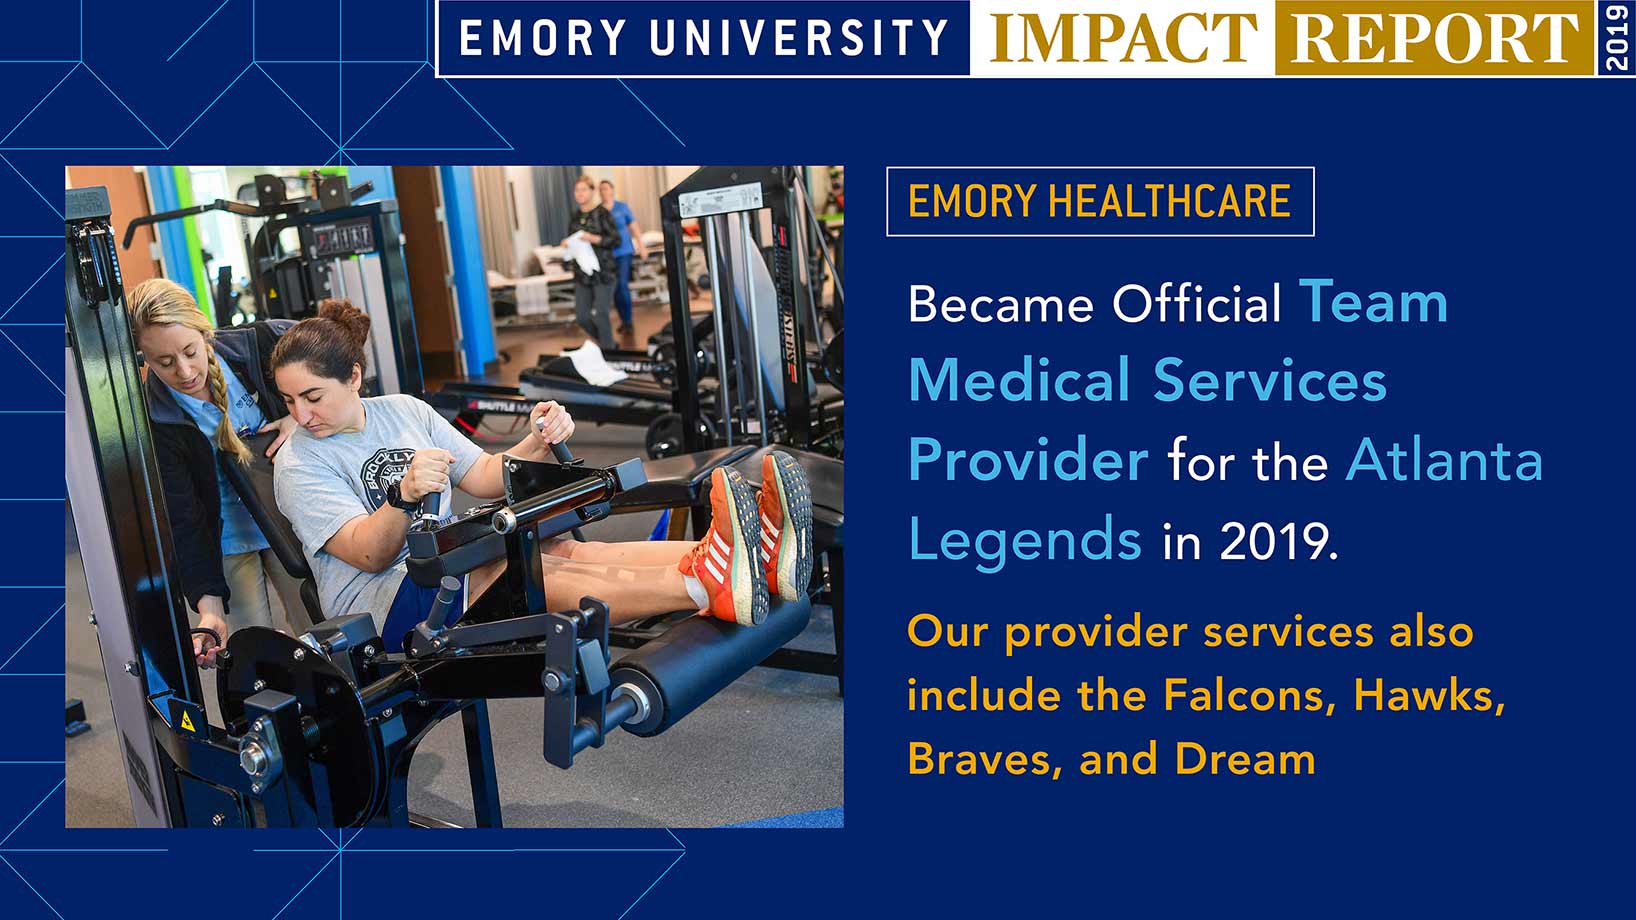 Emory Healthcare Became Official Team Medical Services Provider for the Atlanta Legends in 2019. Our provider services also include the Falcons, Hawks, Braves, and Dream.